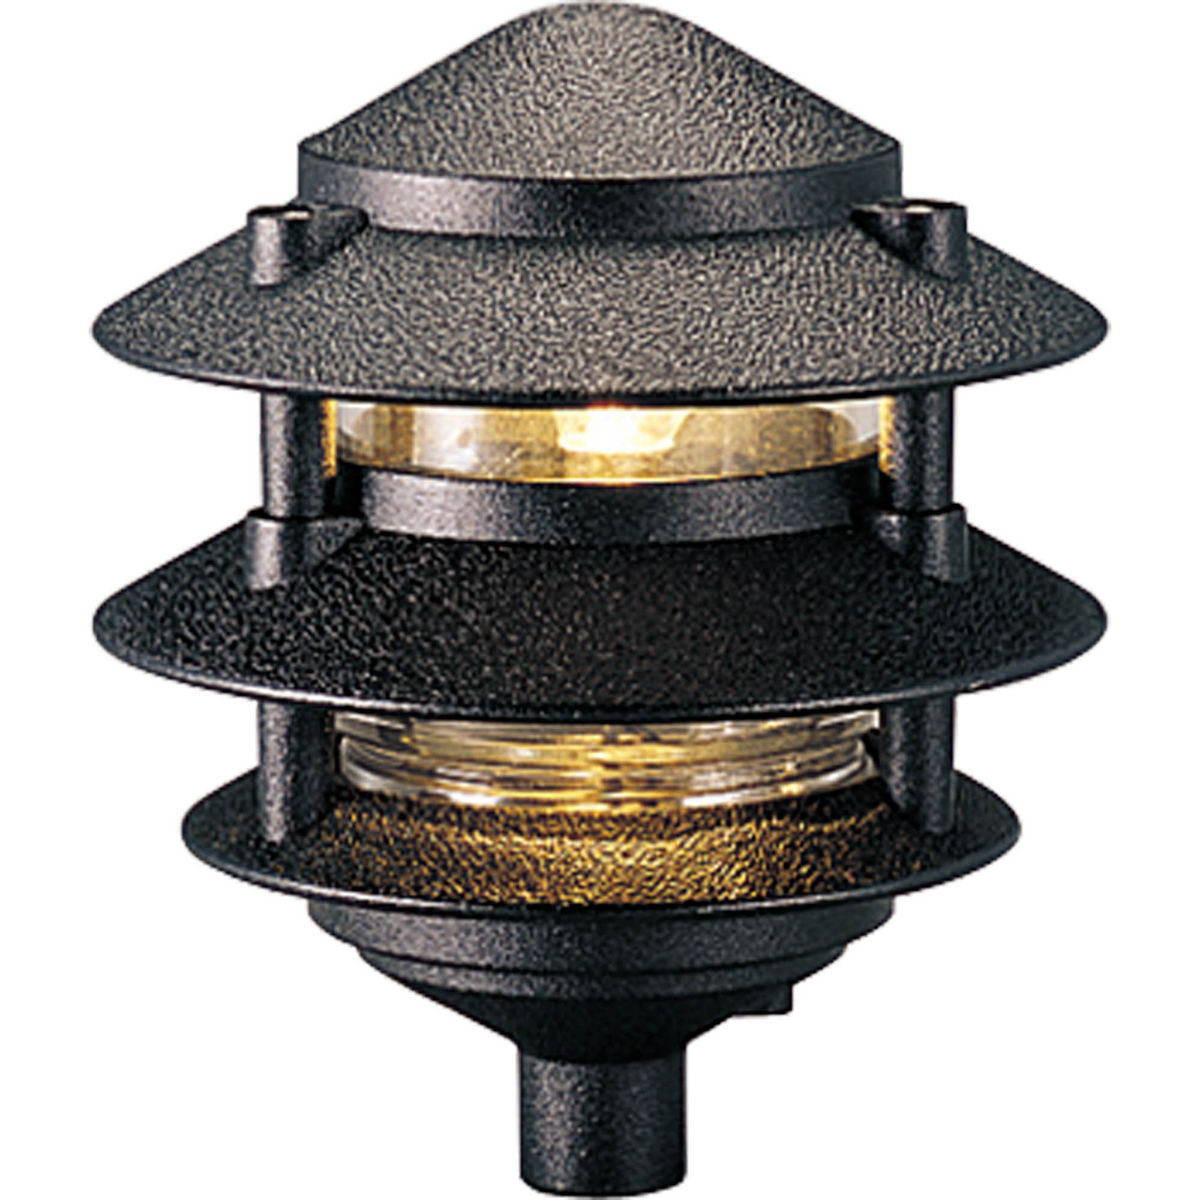 Pagoda three-tier style one-light die-cast aluminum landscape with clear glass liner in a Black painted finish. 1/2 IP threaded fitting. Mounts on landscape post (P8562-31), stake (P5233-31) or approved weatherproof box (order separately).